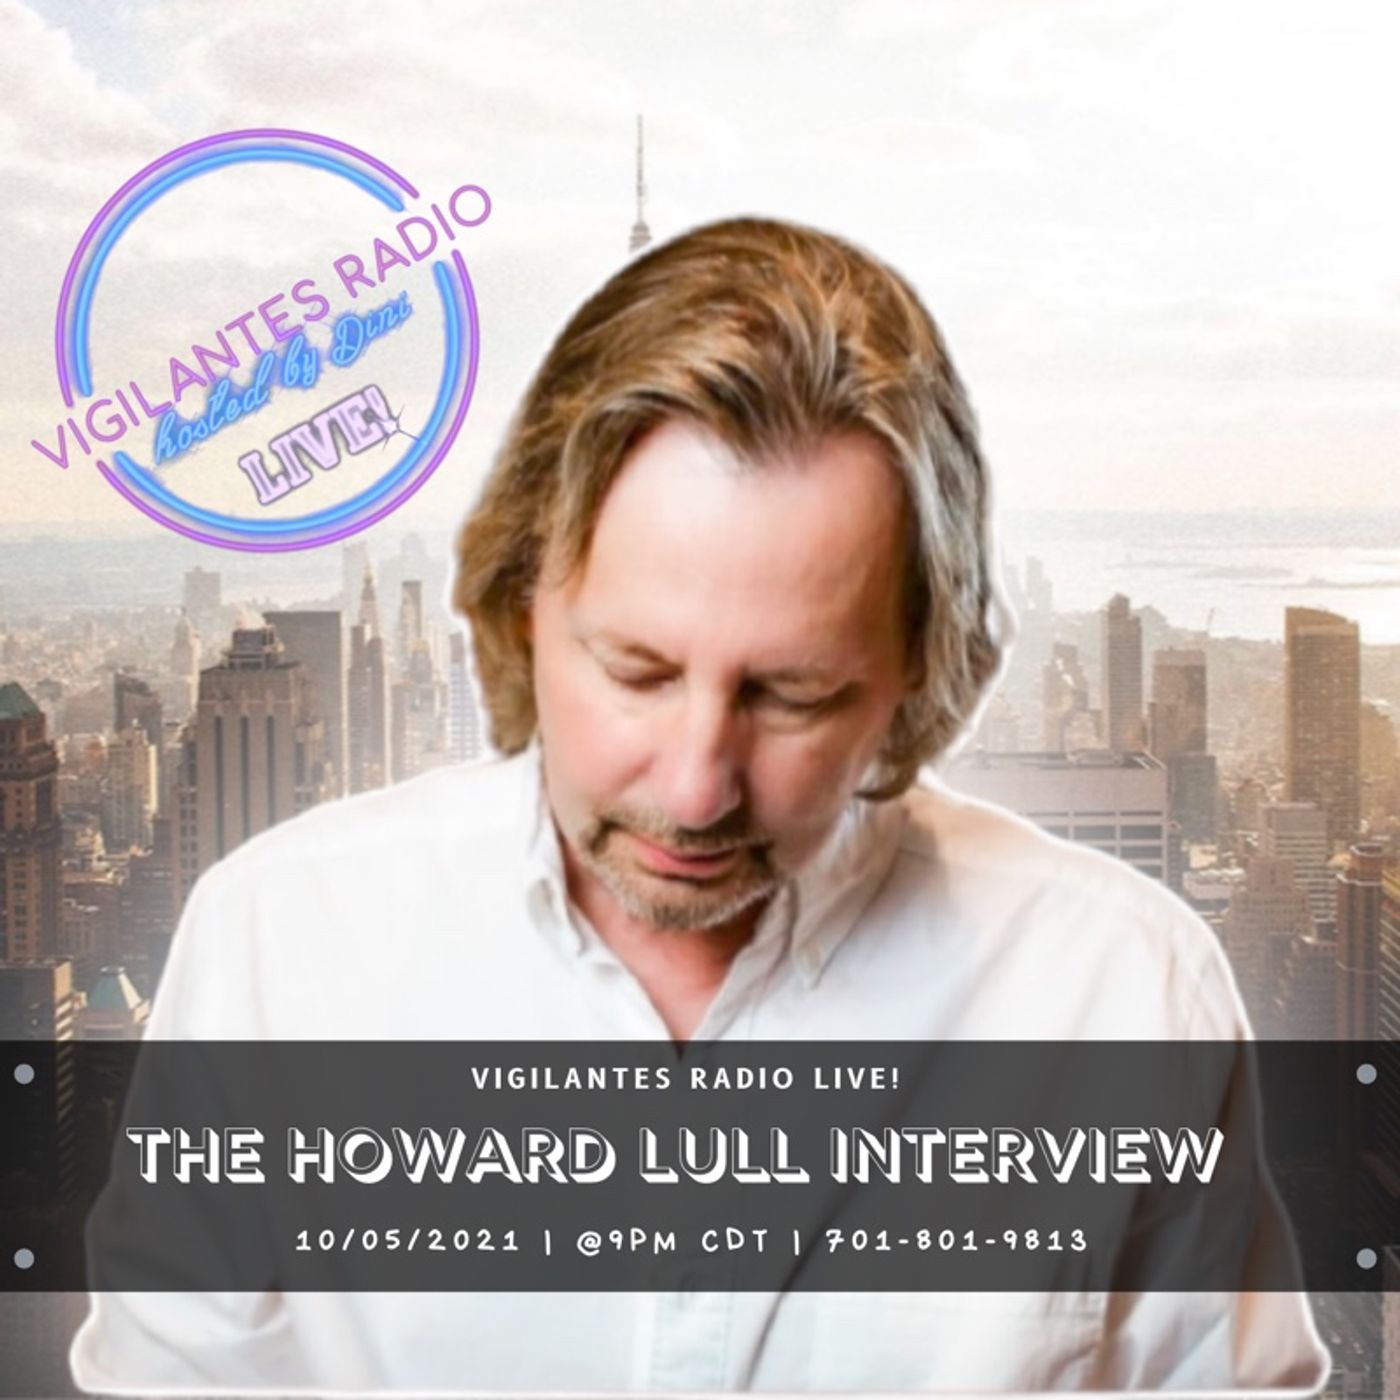 The Howard Lull Interview. Image